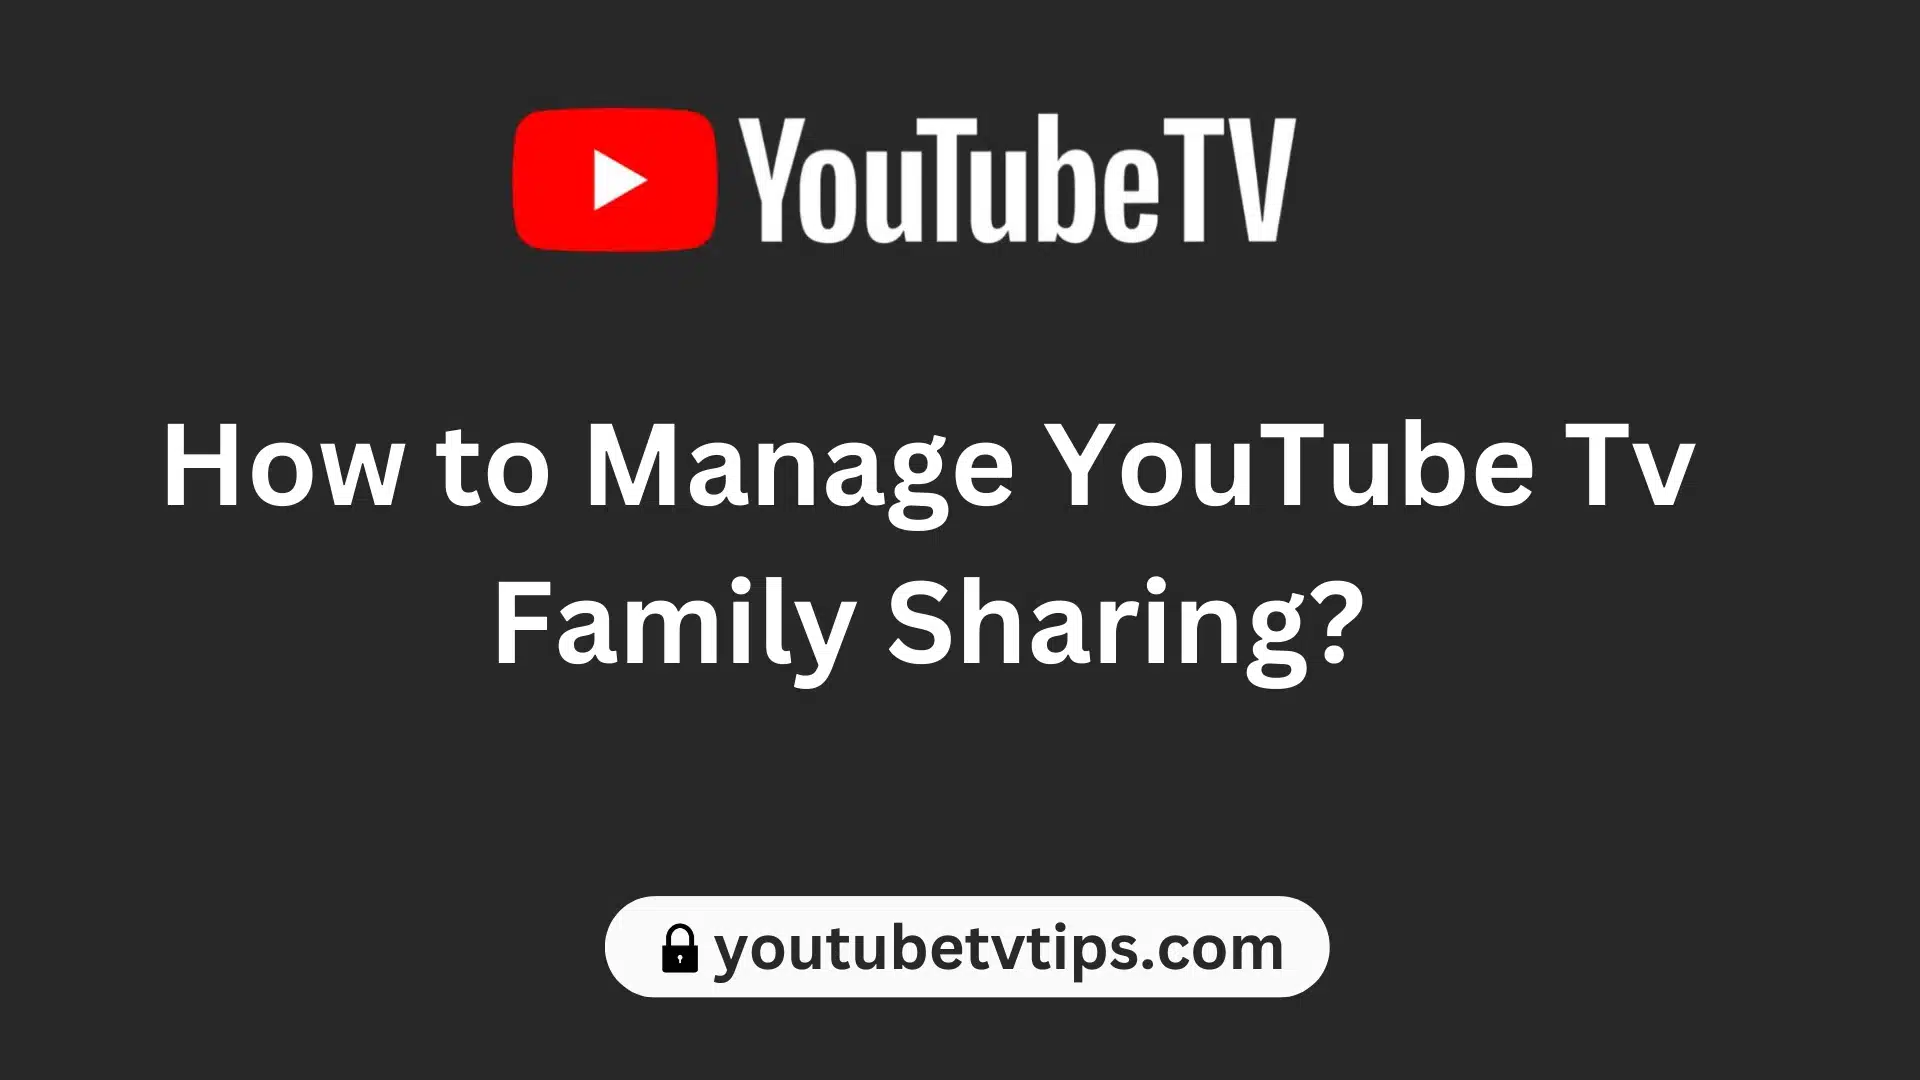 How to Manage YouTube Tv Family Sharing?